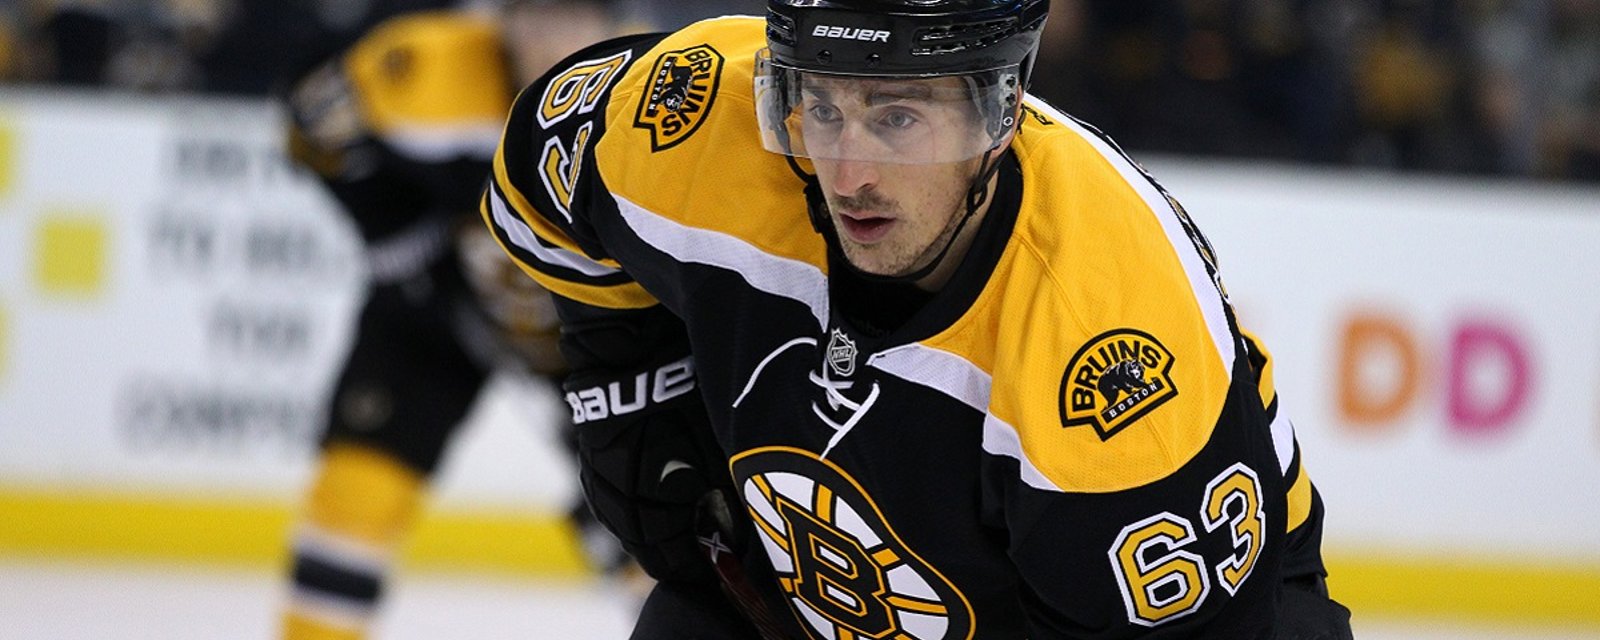 Breaking: Notorious pest Brad Marchand in trouble with the NHL again!